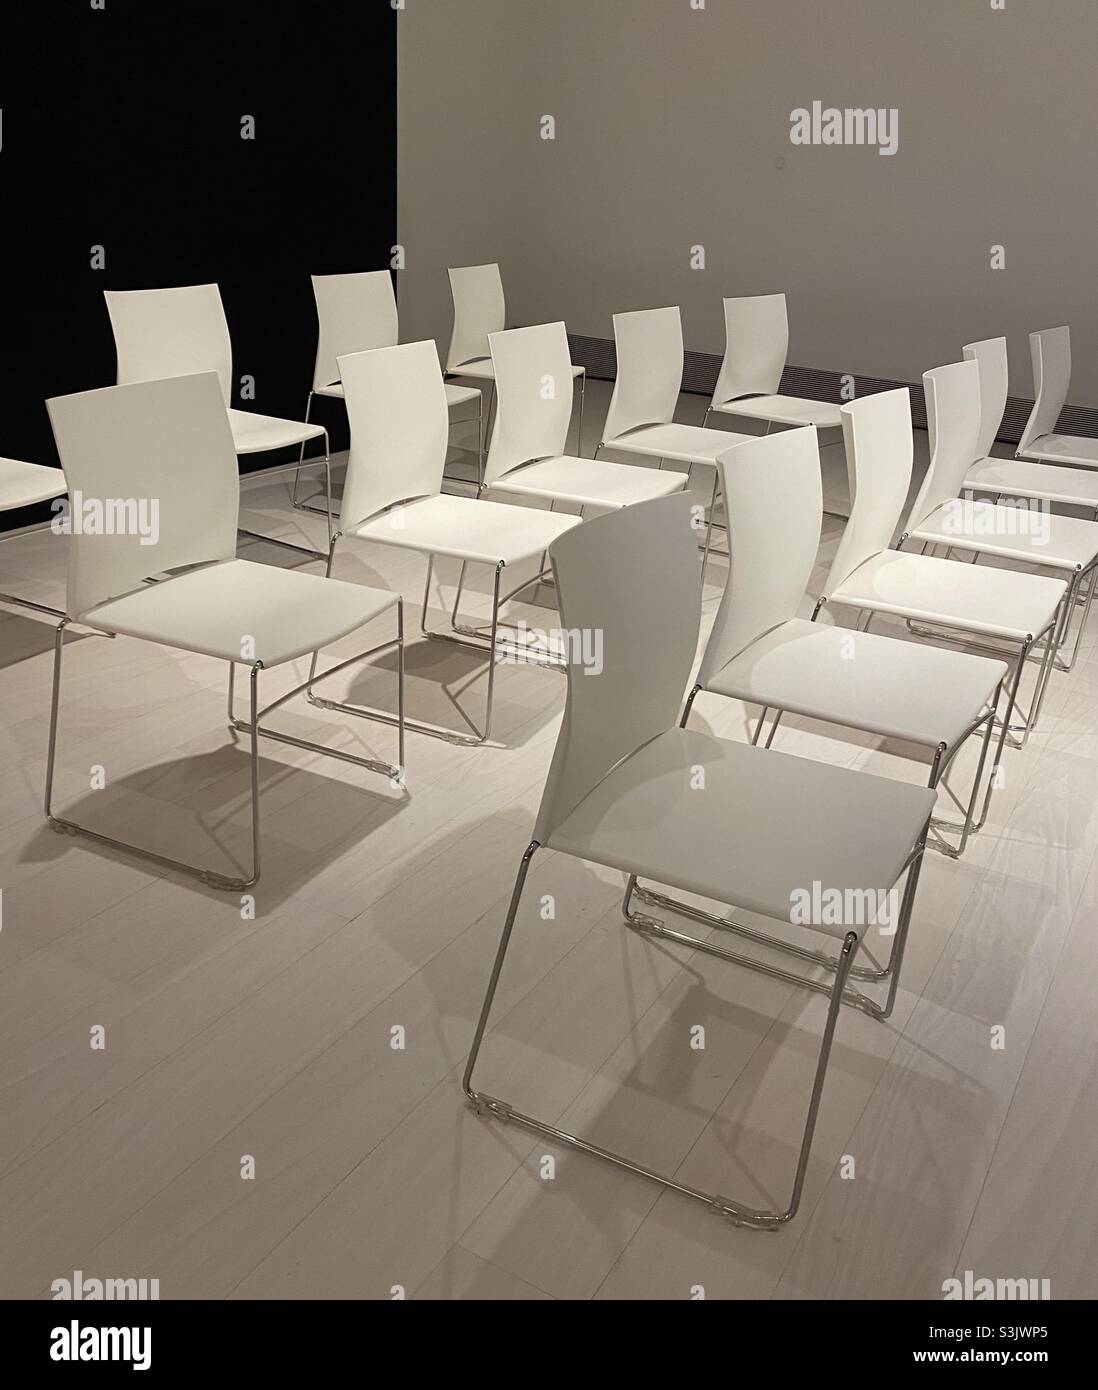 Empty class or lecture room awaiting an audience to arrive. Neatly arranged and with high quality furniture and neat presentation of the room. Stock Photo